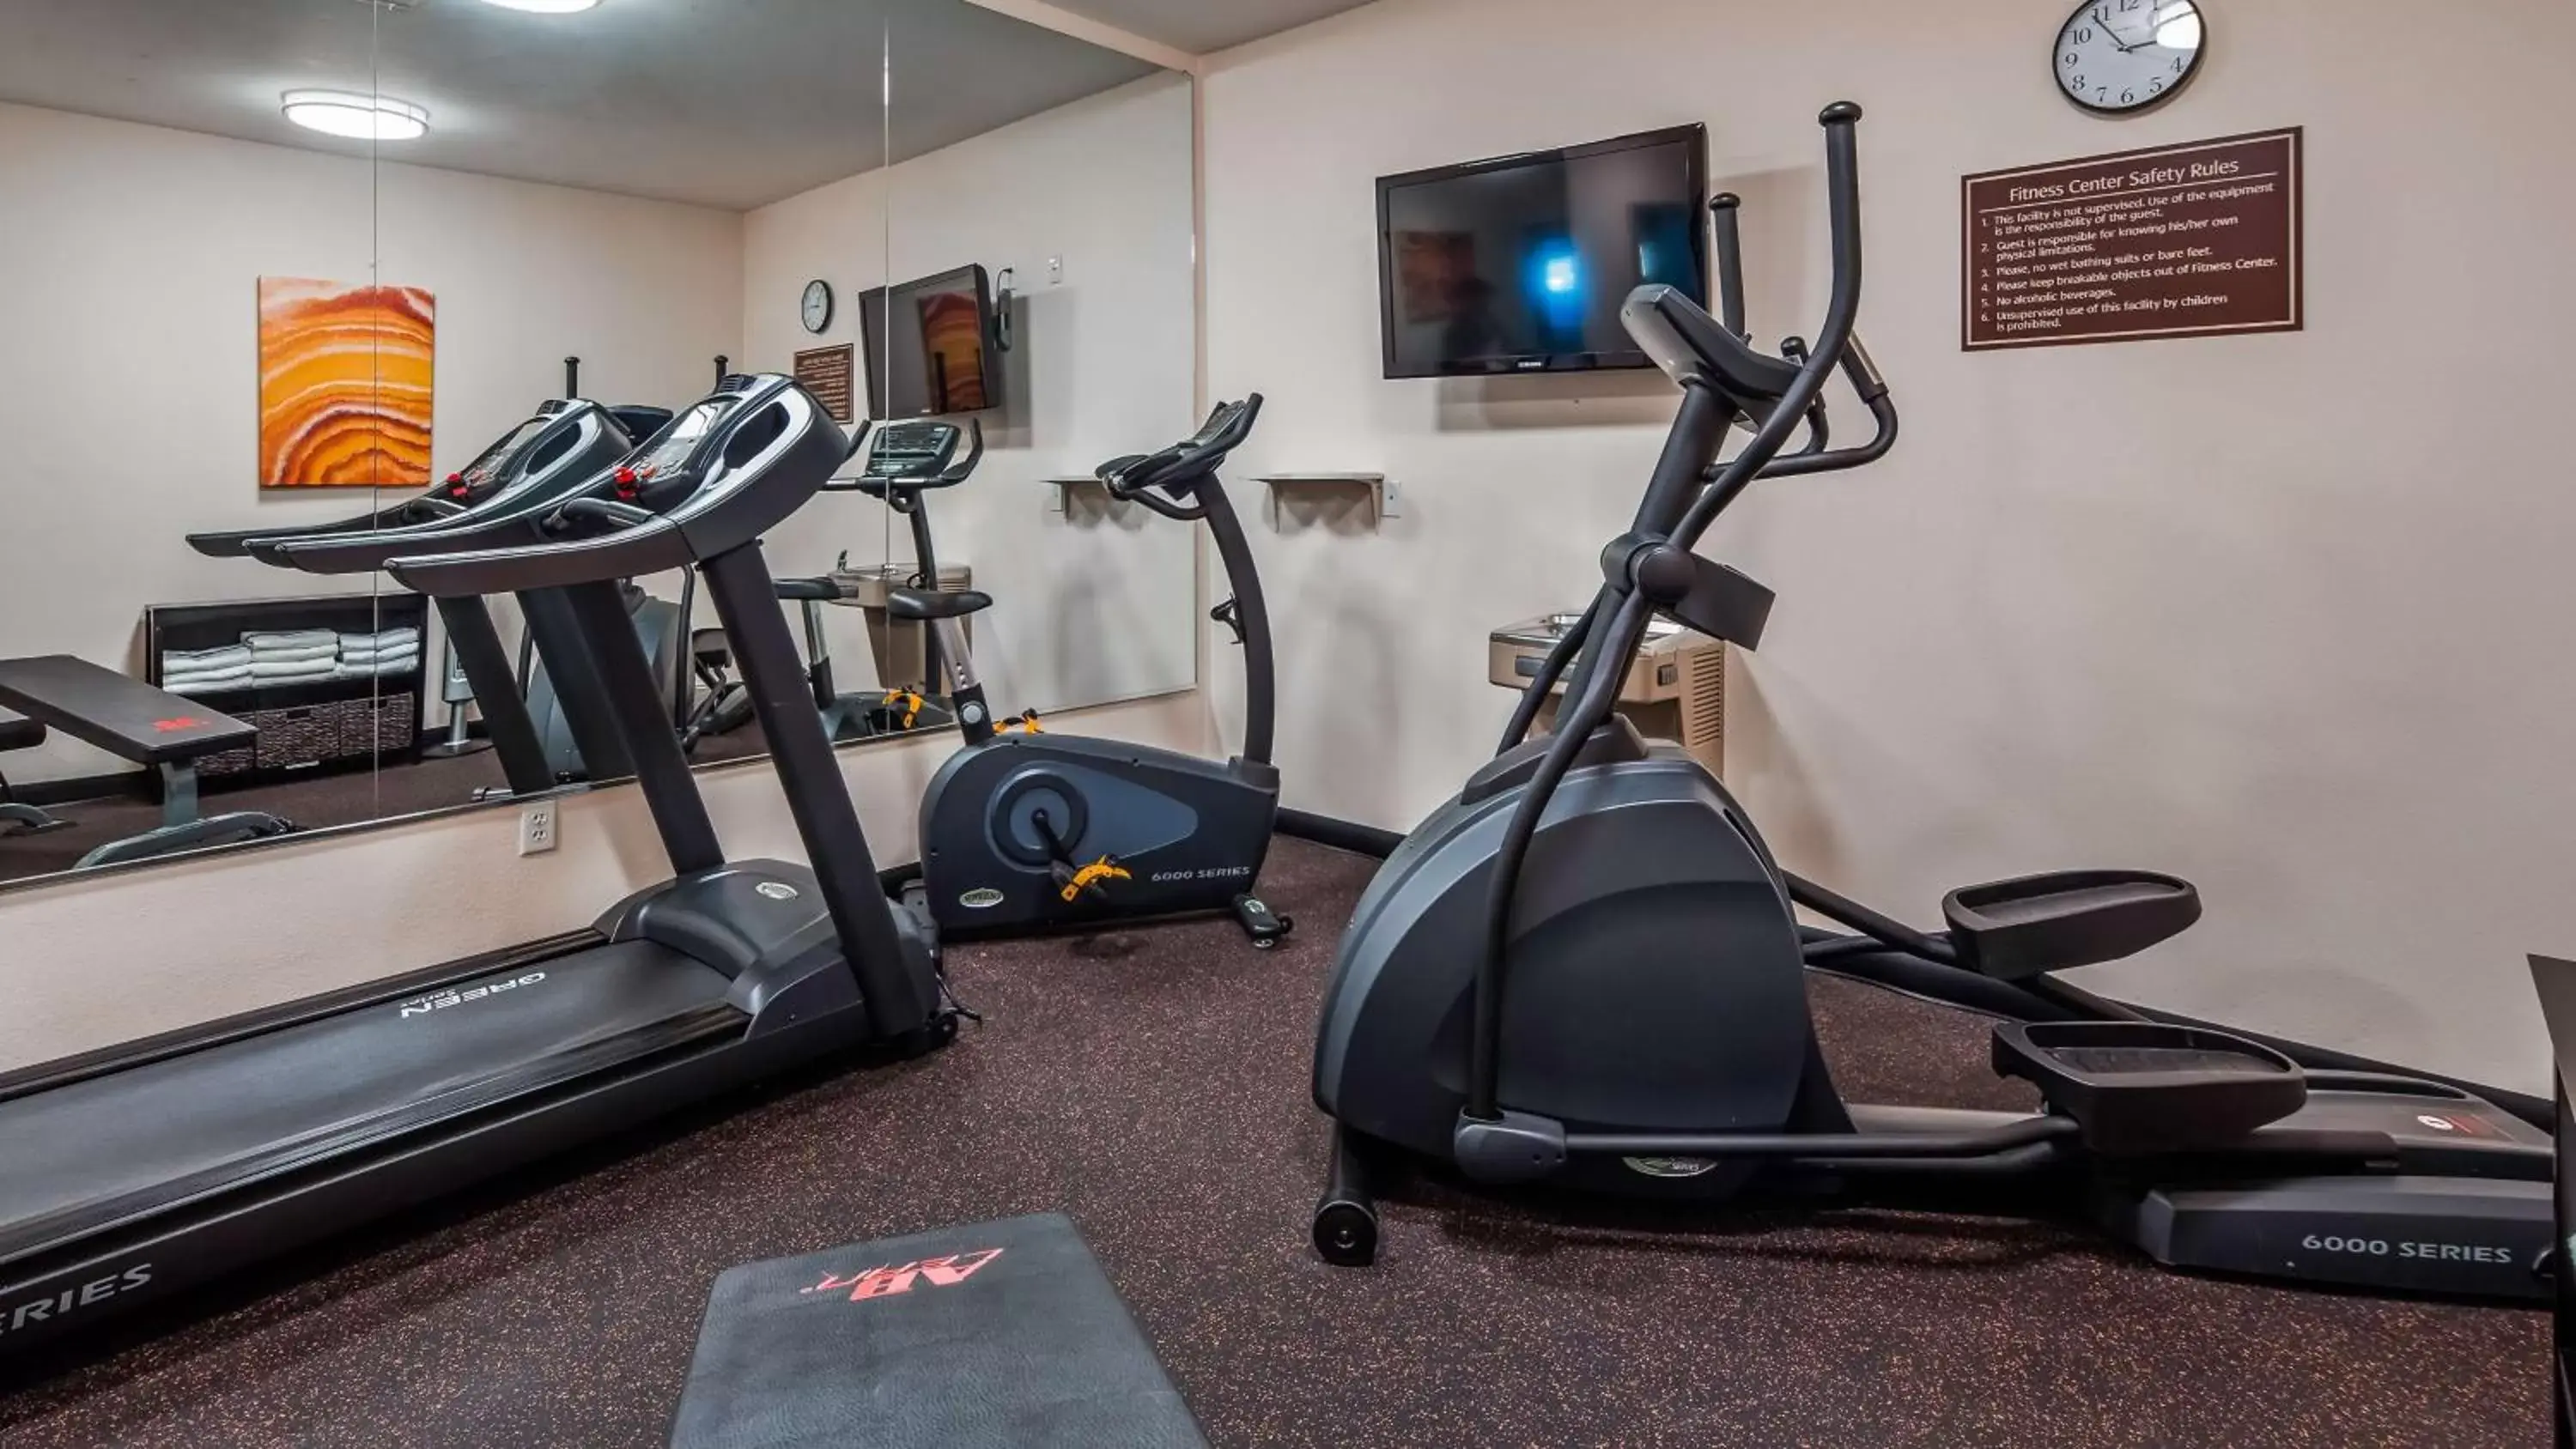 Fitness centre/facilities, Fitness Center/Facilities in Best Western Plus Wakeeney Inn & Suites